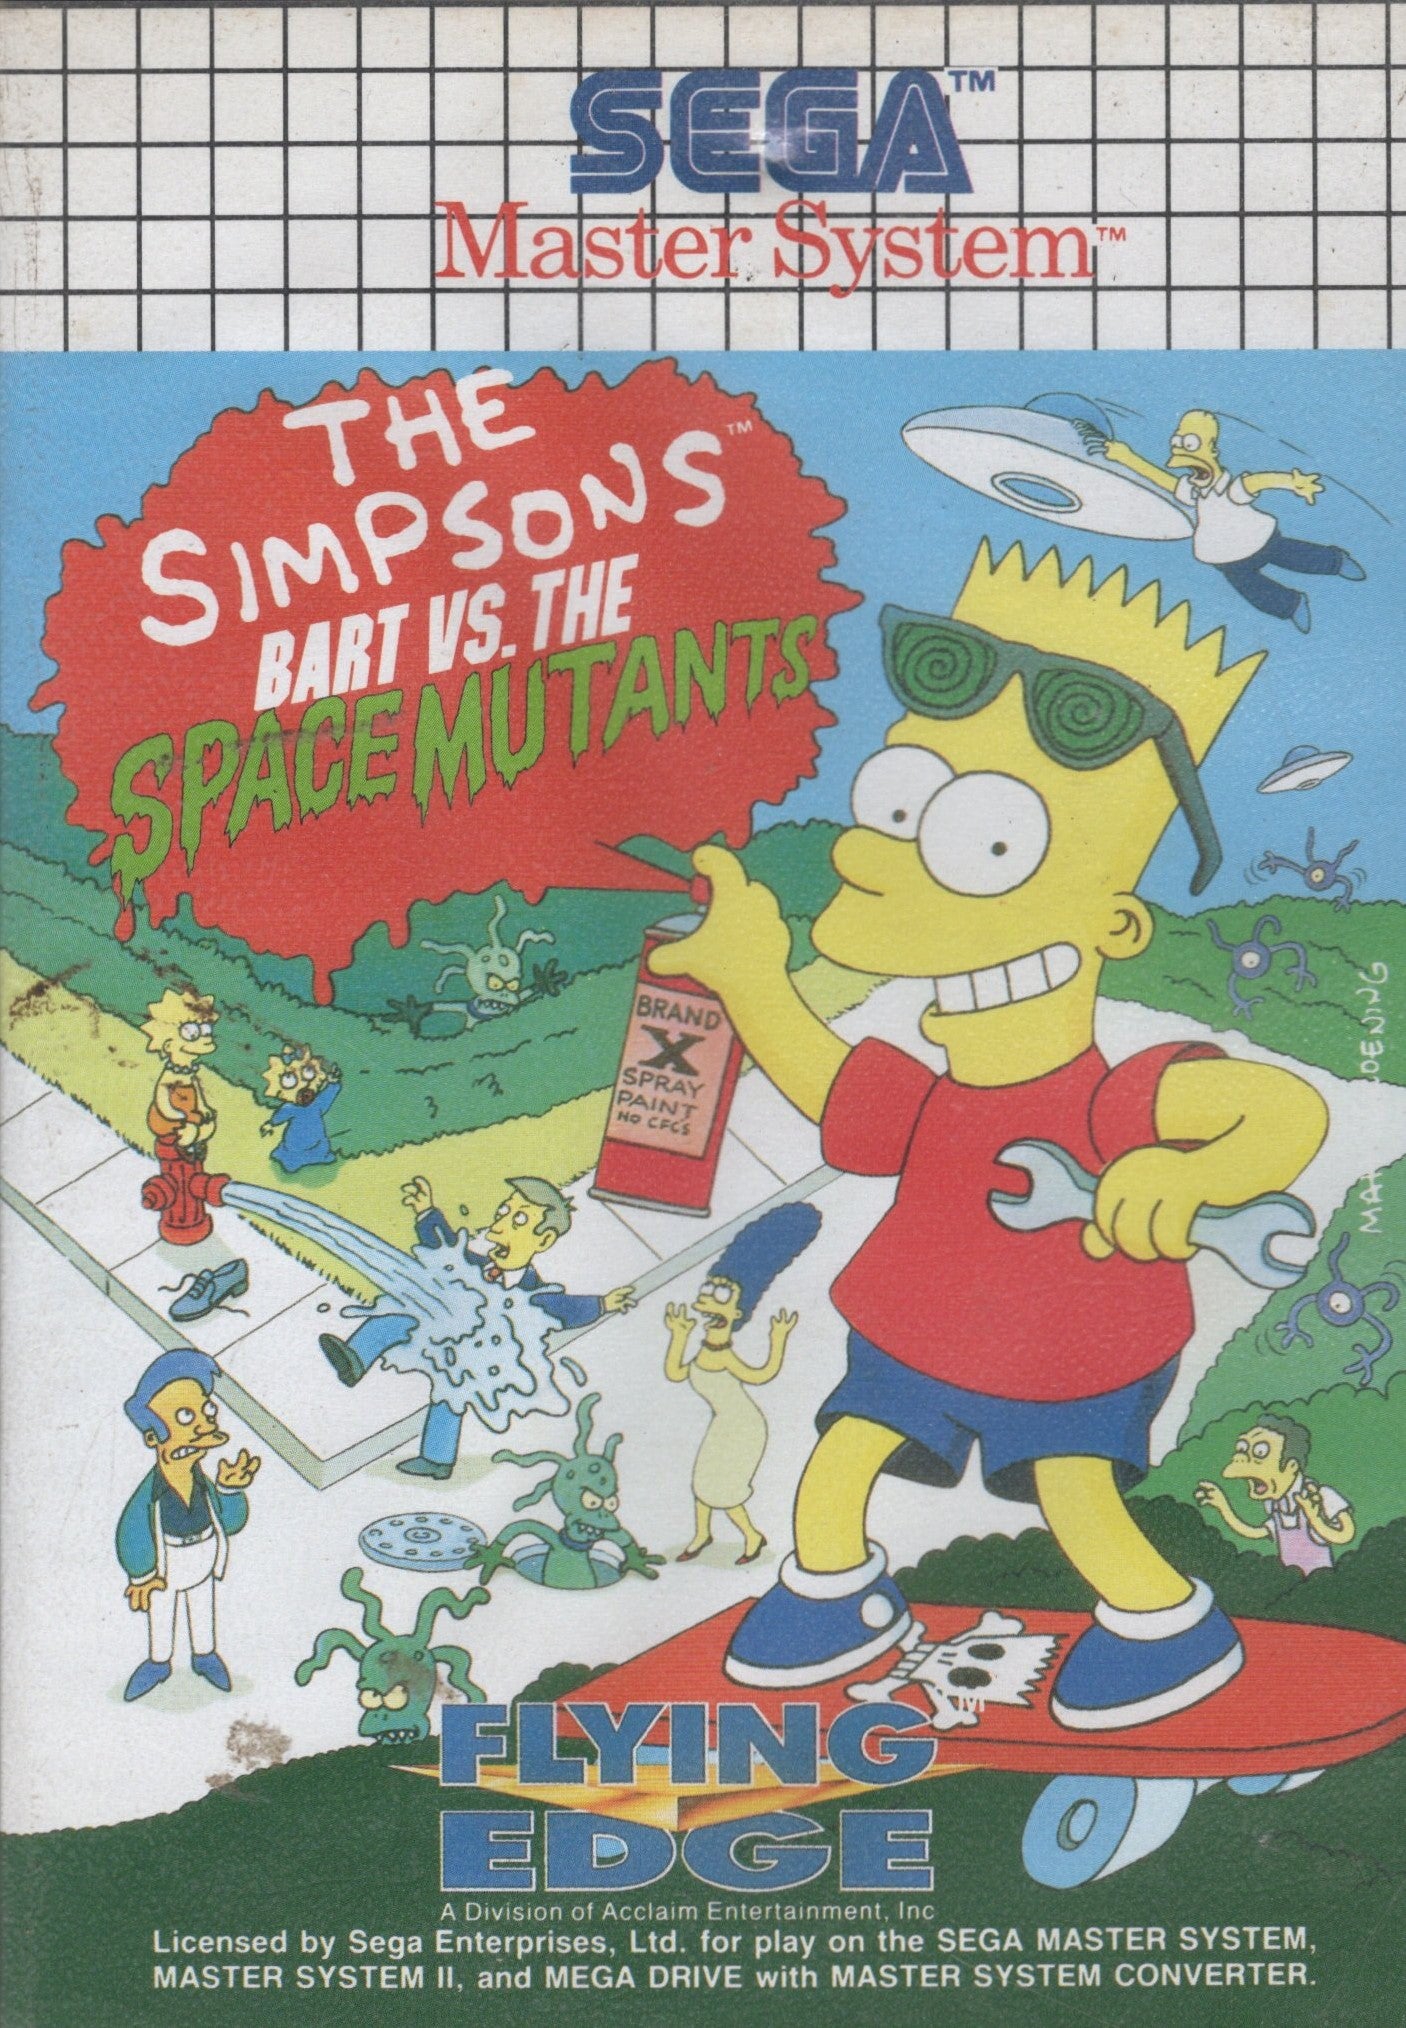 MASTER SYSTEM THE SIMPSONS BART VS SPACE MUTANTS - USADO